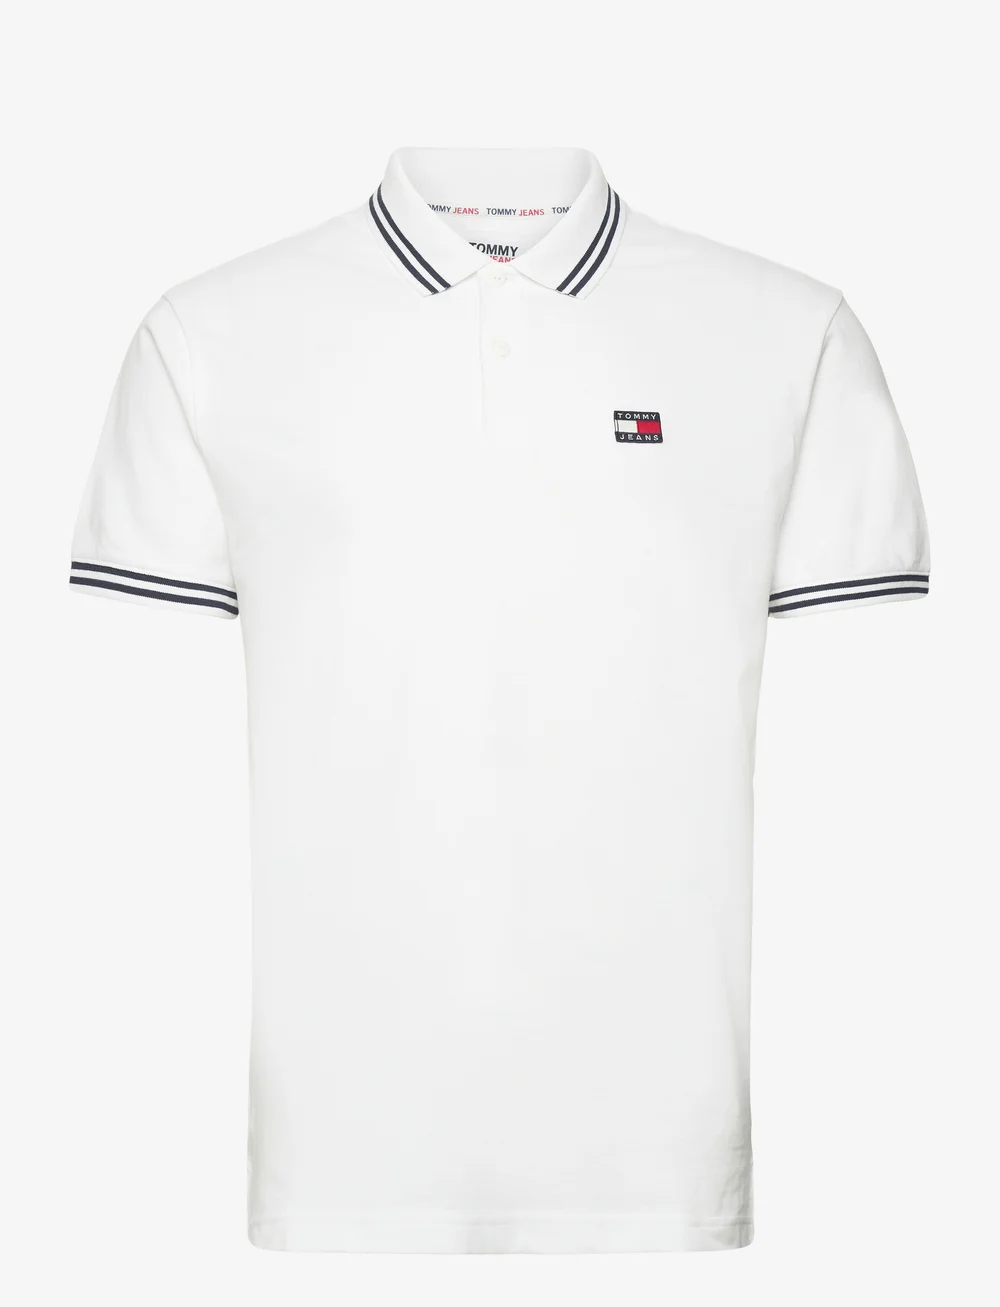 Polo Boozt.com Tommy - Clsc - Österreich Jeans Poloshirts Tjm Tipping Detail